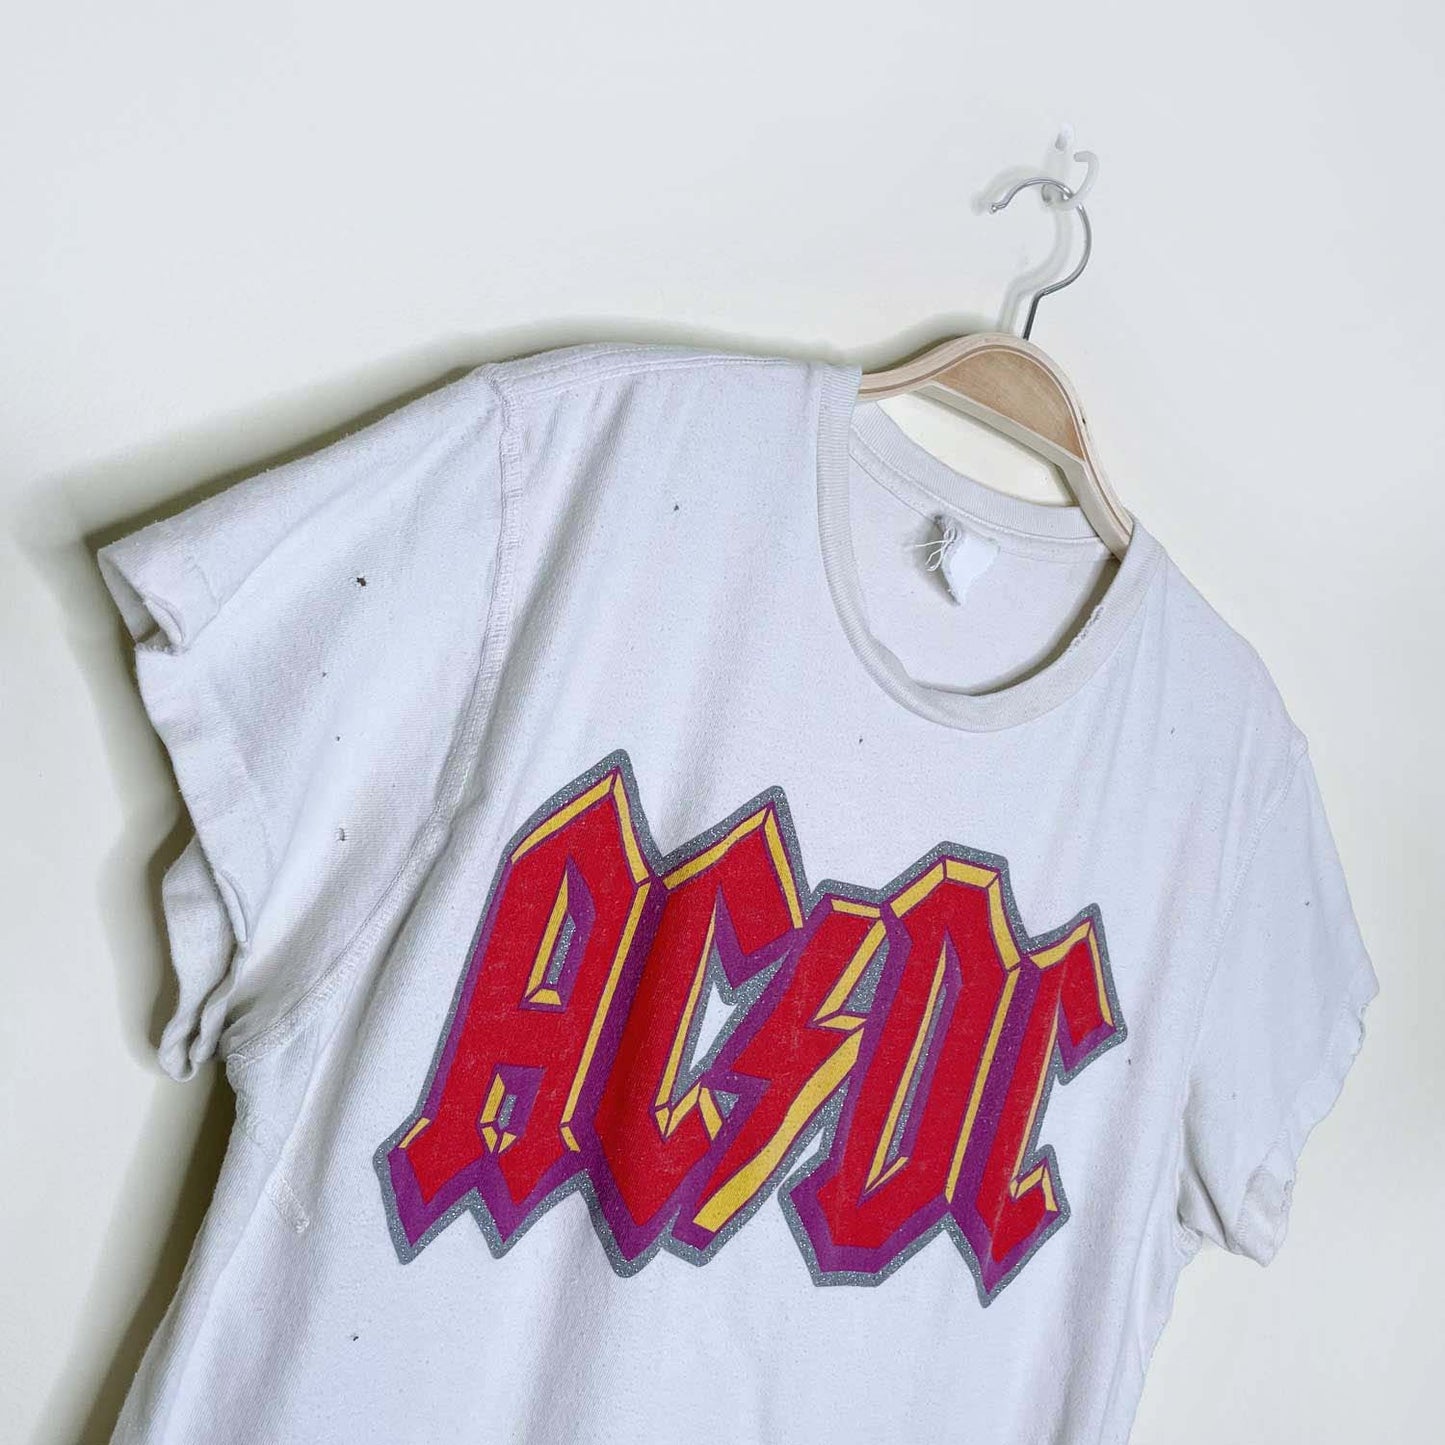 acdc highway to hell '79 distressed tee - size medium